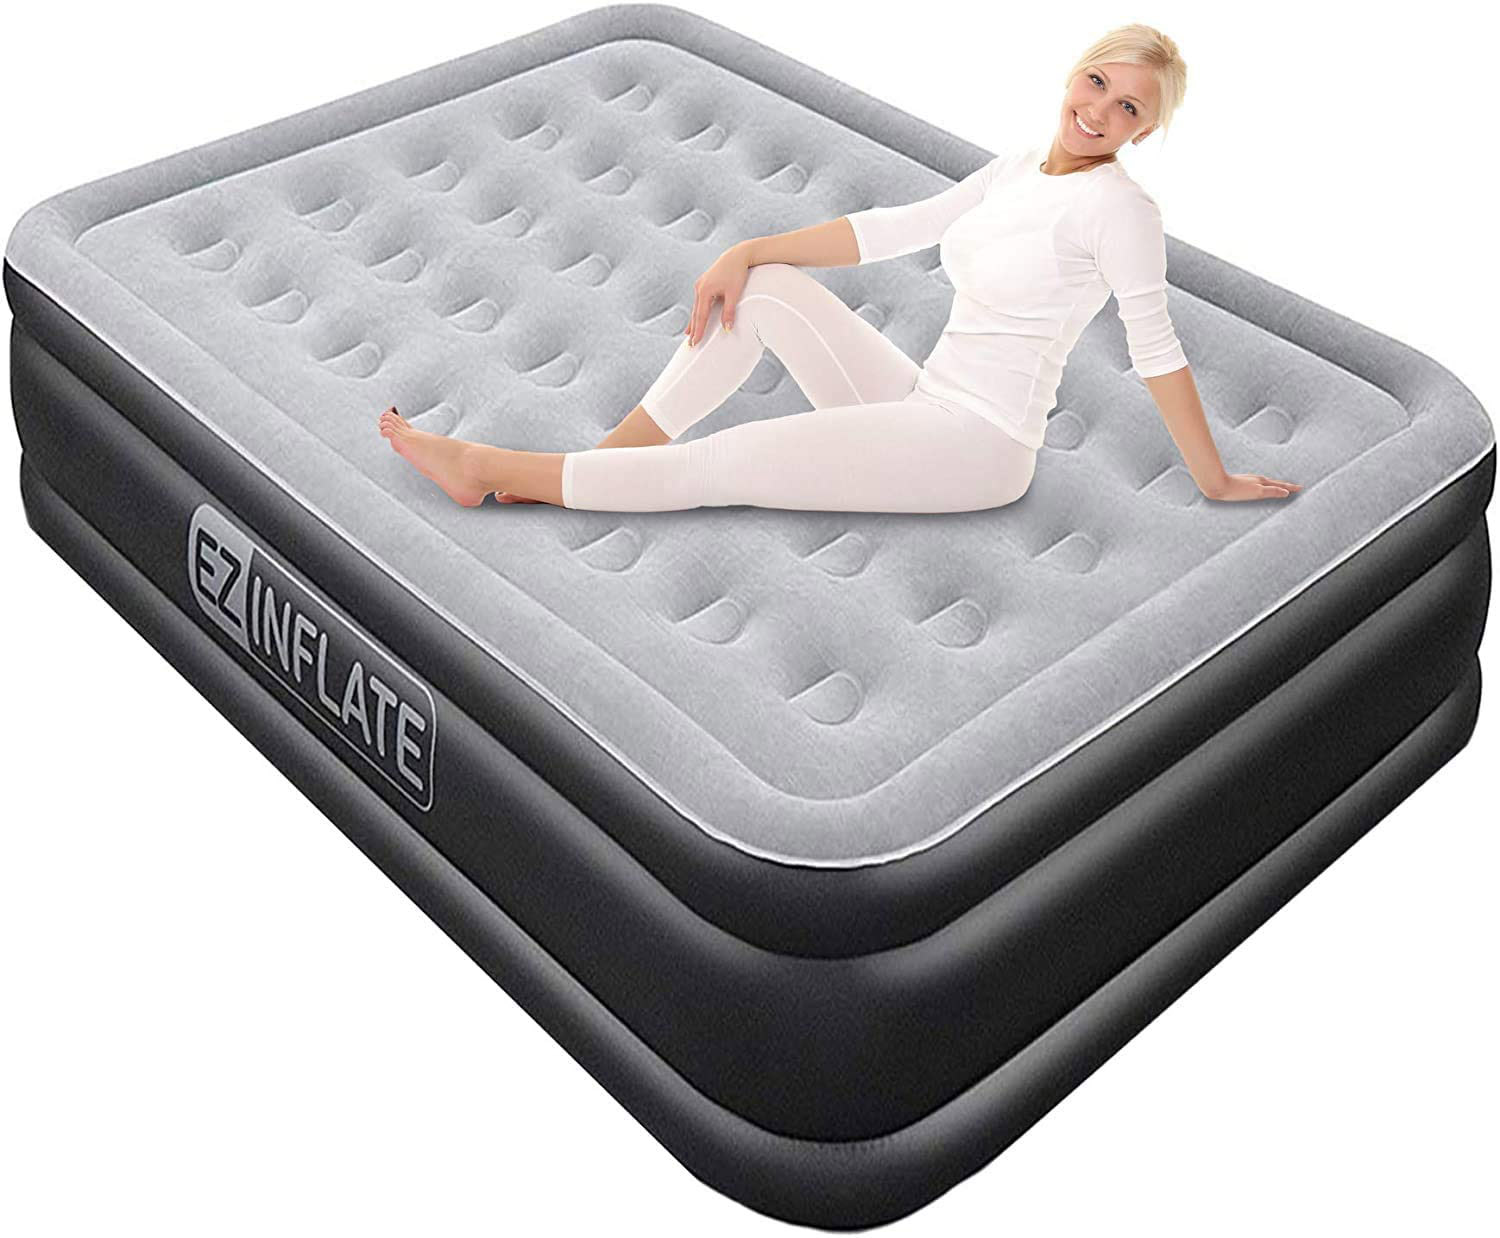 best quality air mattress for guests